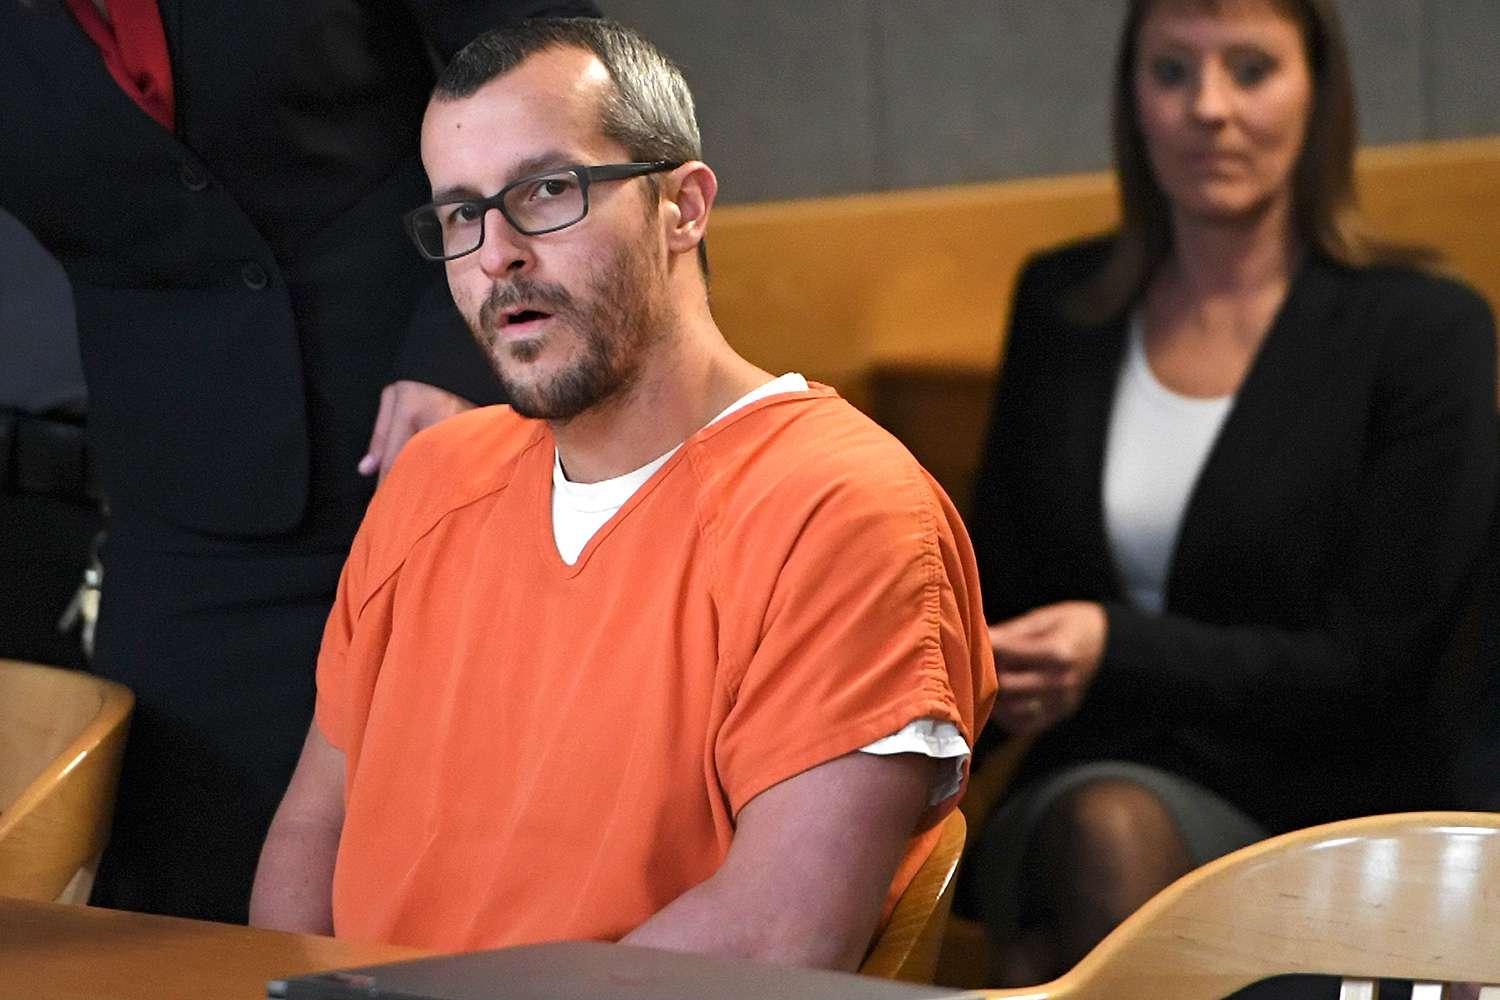 Where Is Chris Watts Today? A Look at His Life in Prison After Family Murders